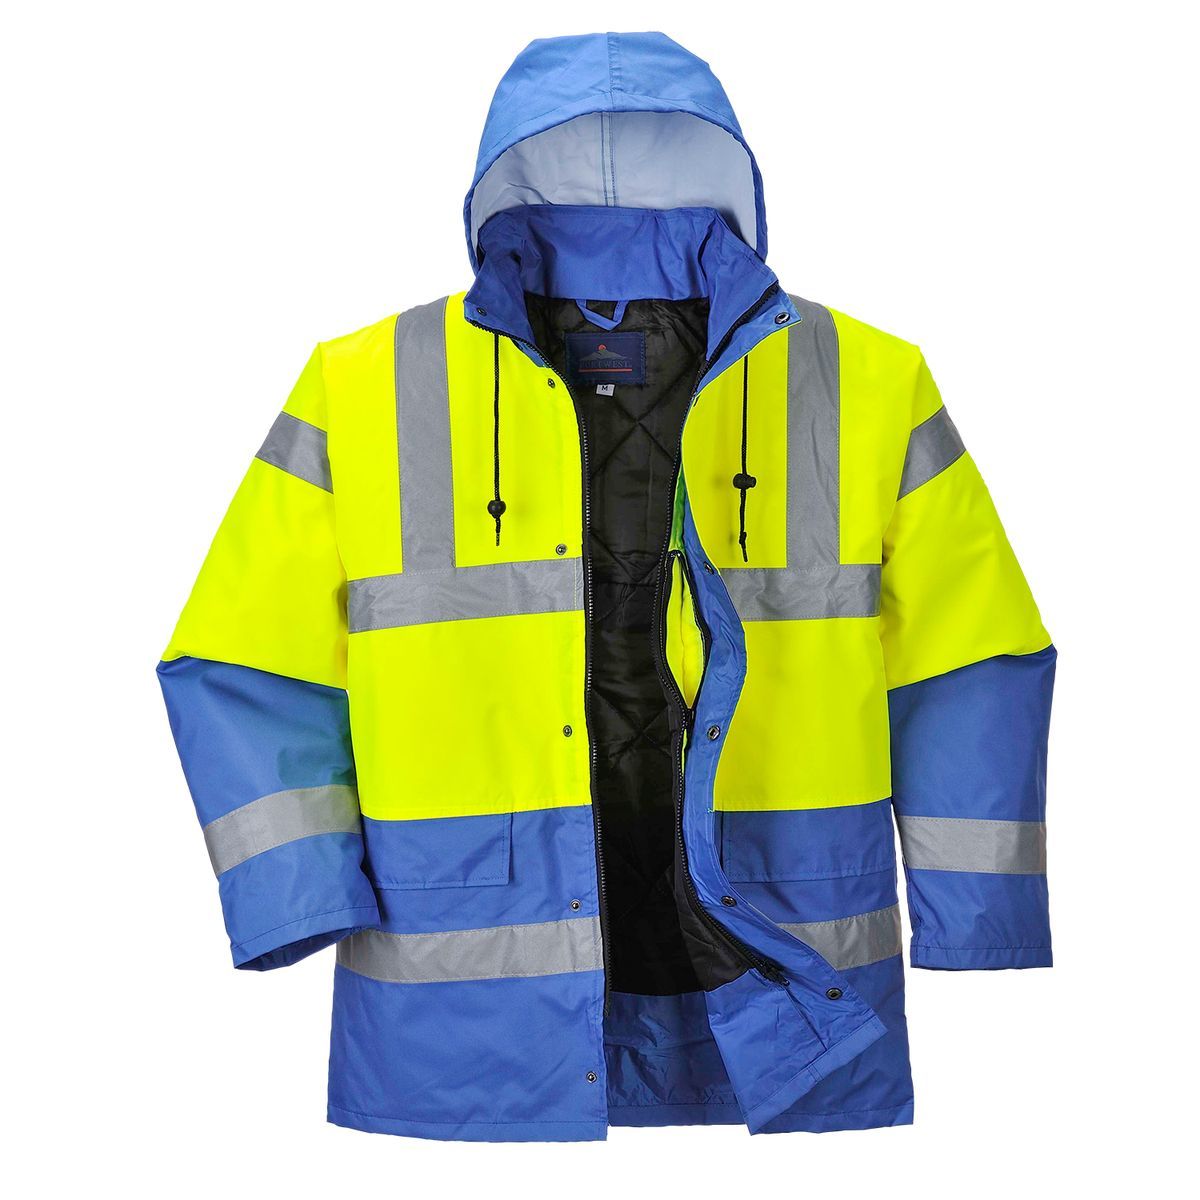 Style US466 HiVis Contrast Traffic Jacket-6